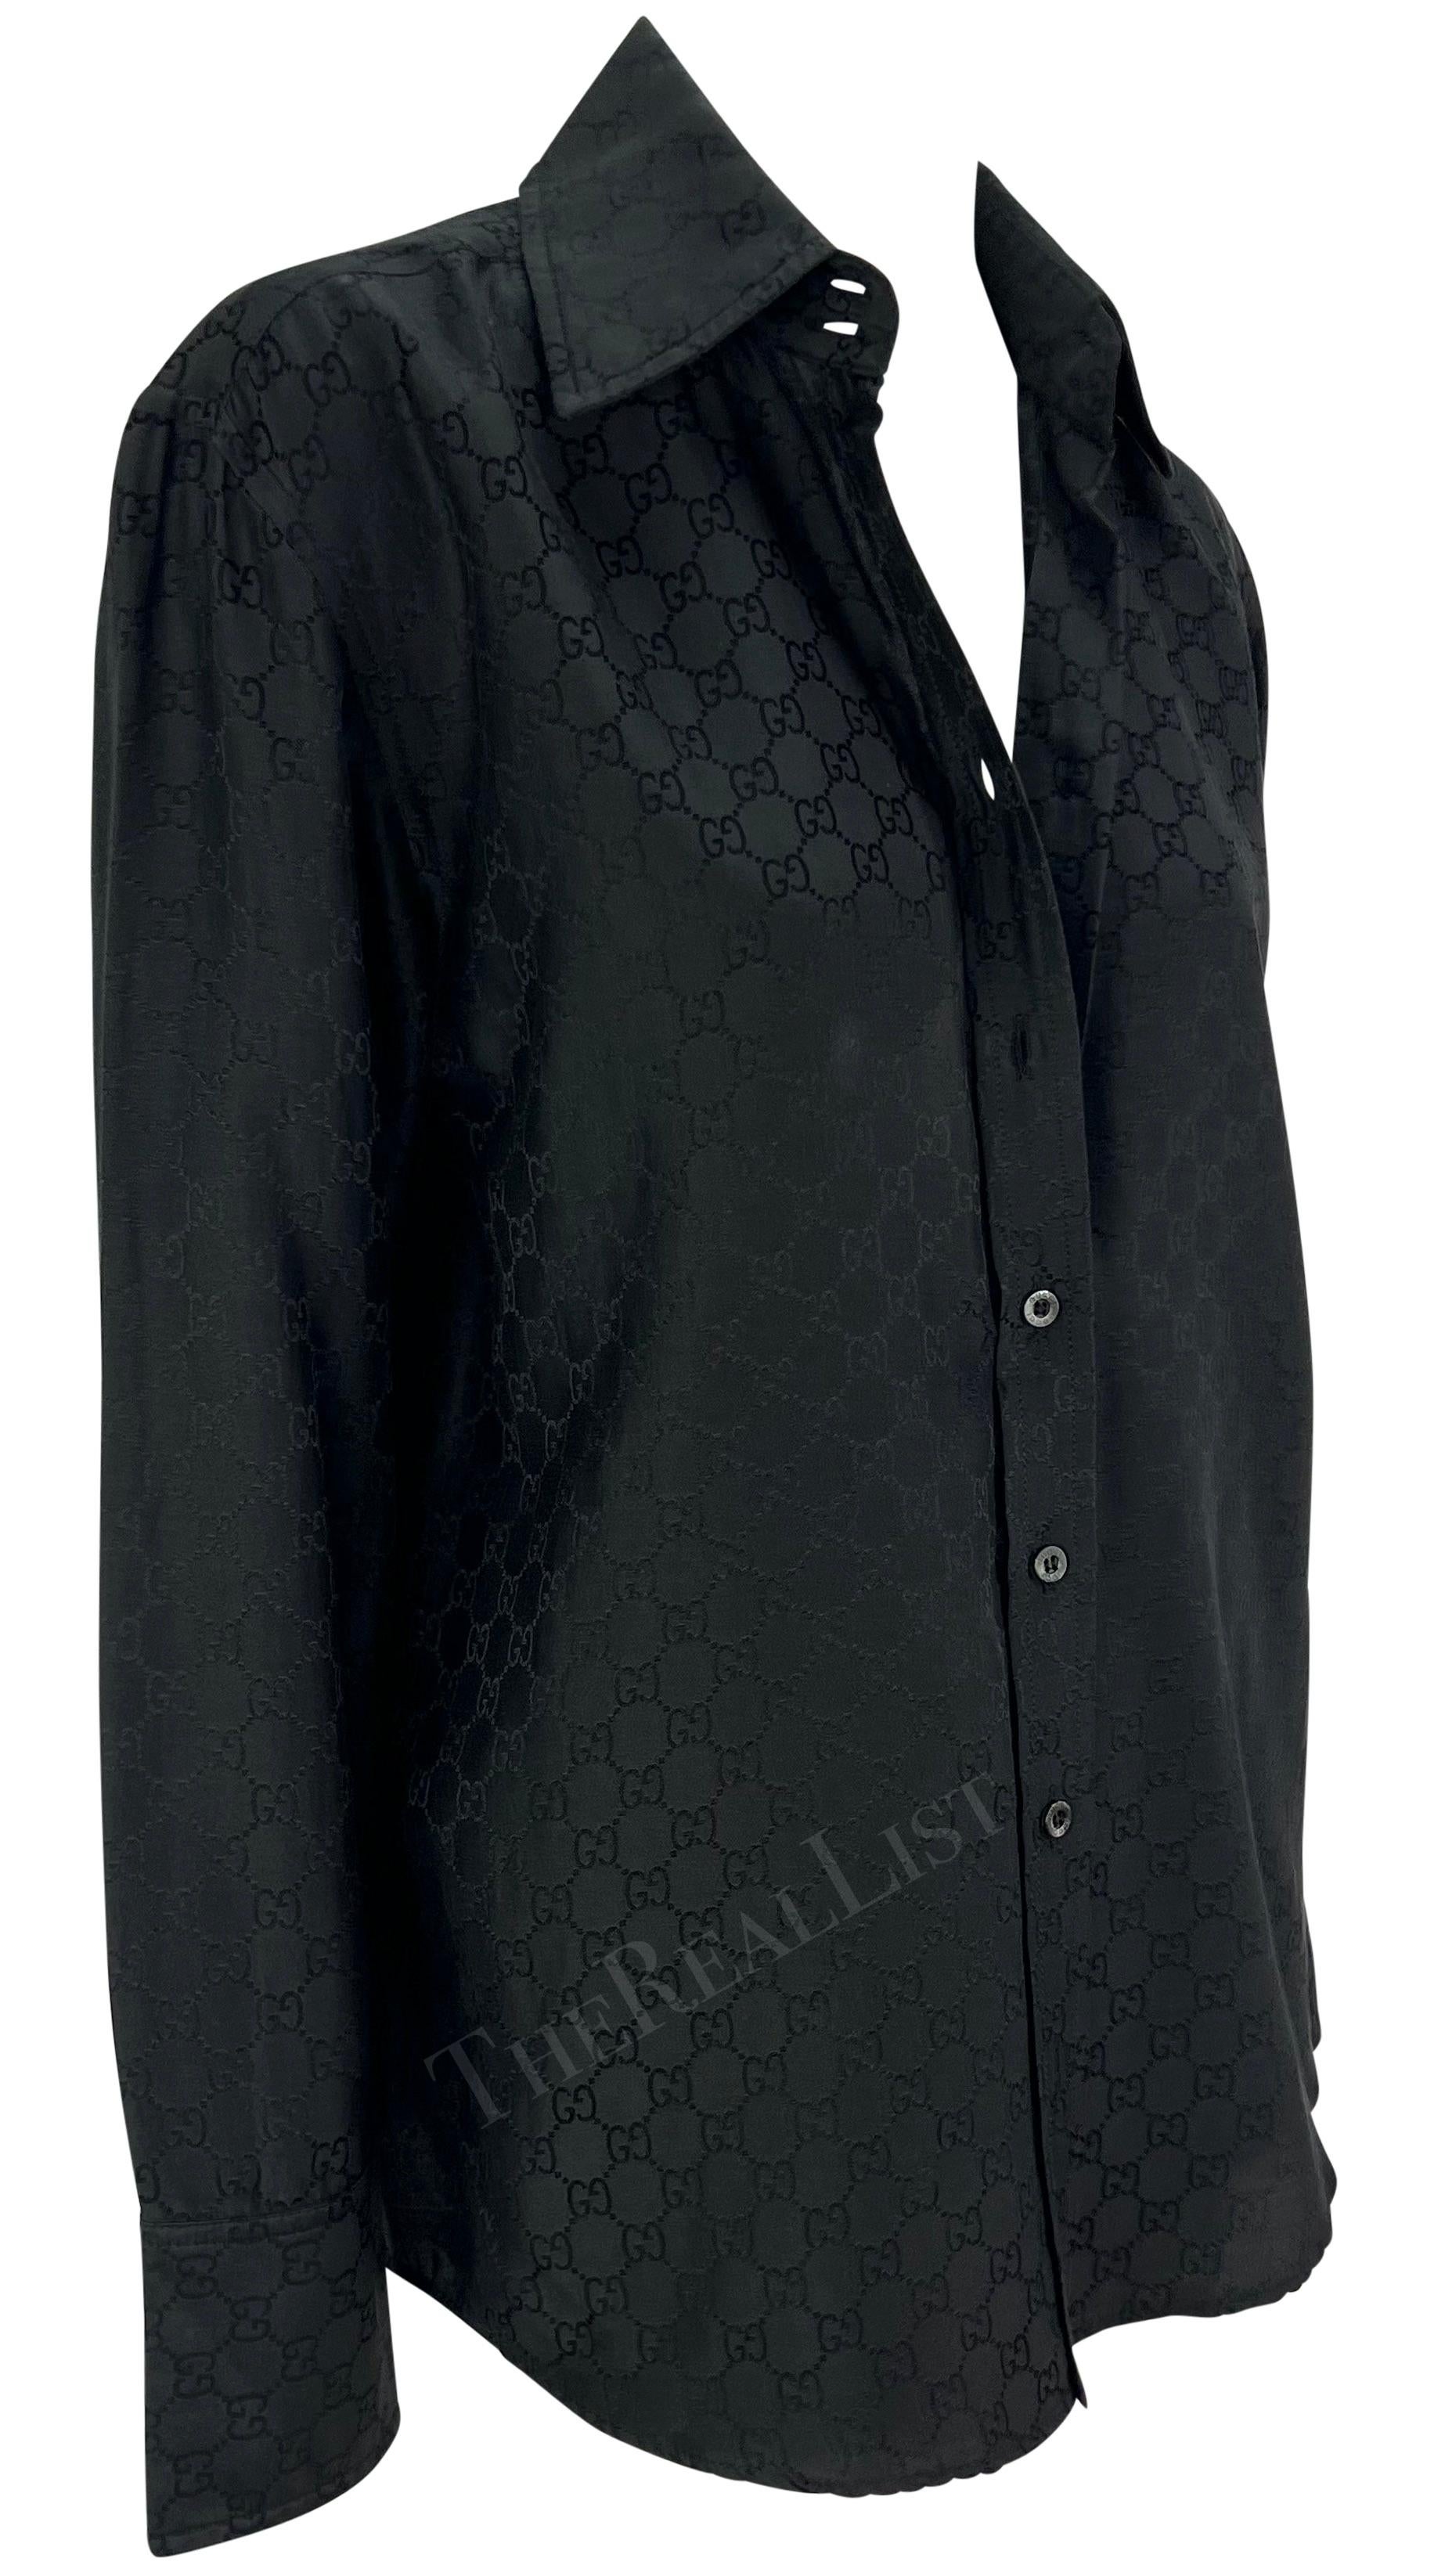 S/S 1998 Gucci by Tom Ford Black 'GG' Monogram Button Down Collar Shirt For Sale 4